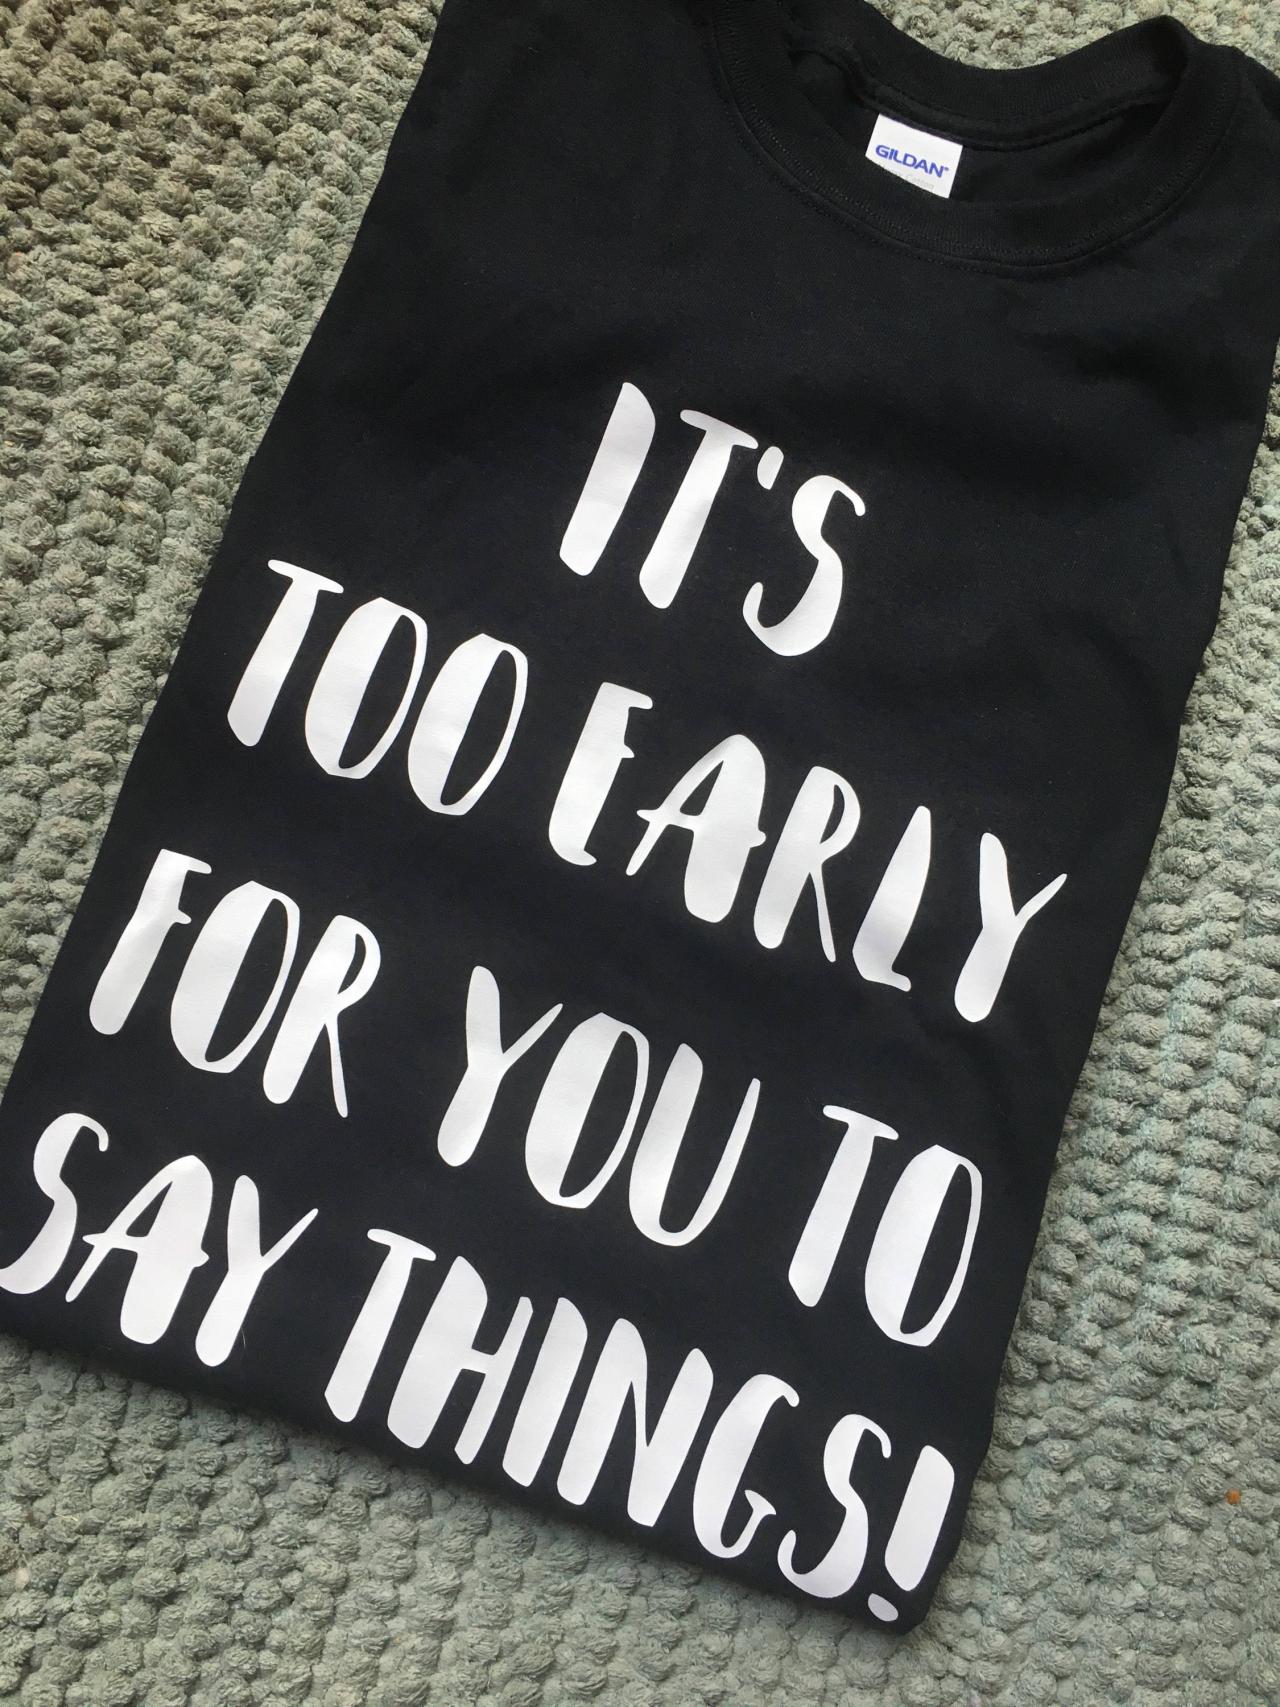 It's Too Early For You To Say Things Shirt